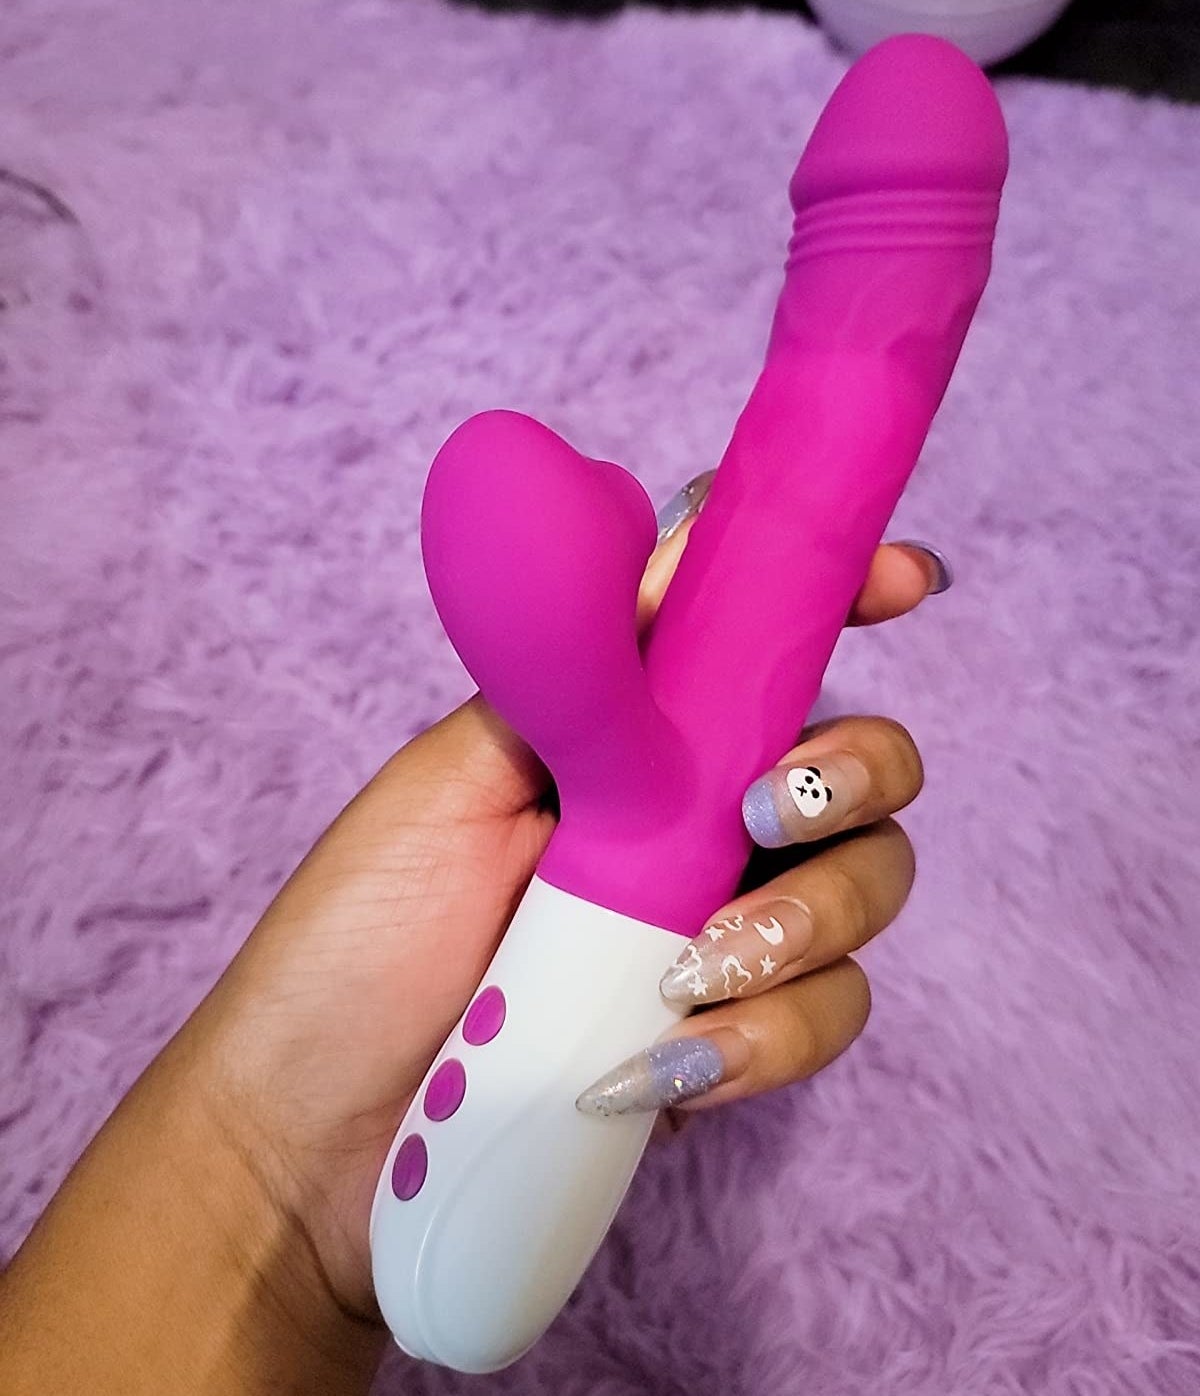 reviewer holding pink rabbit vibrator with suction arm